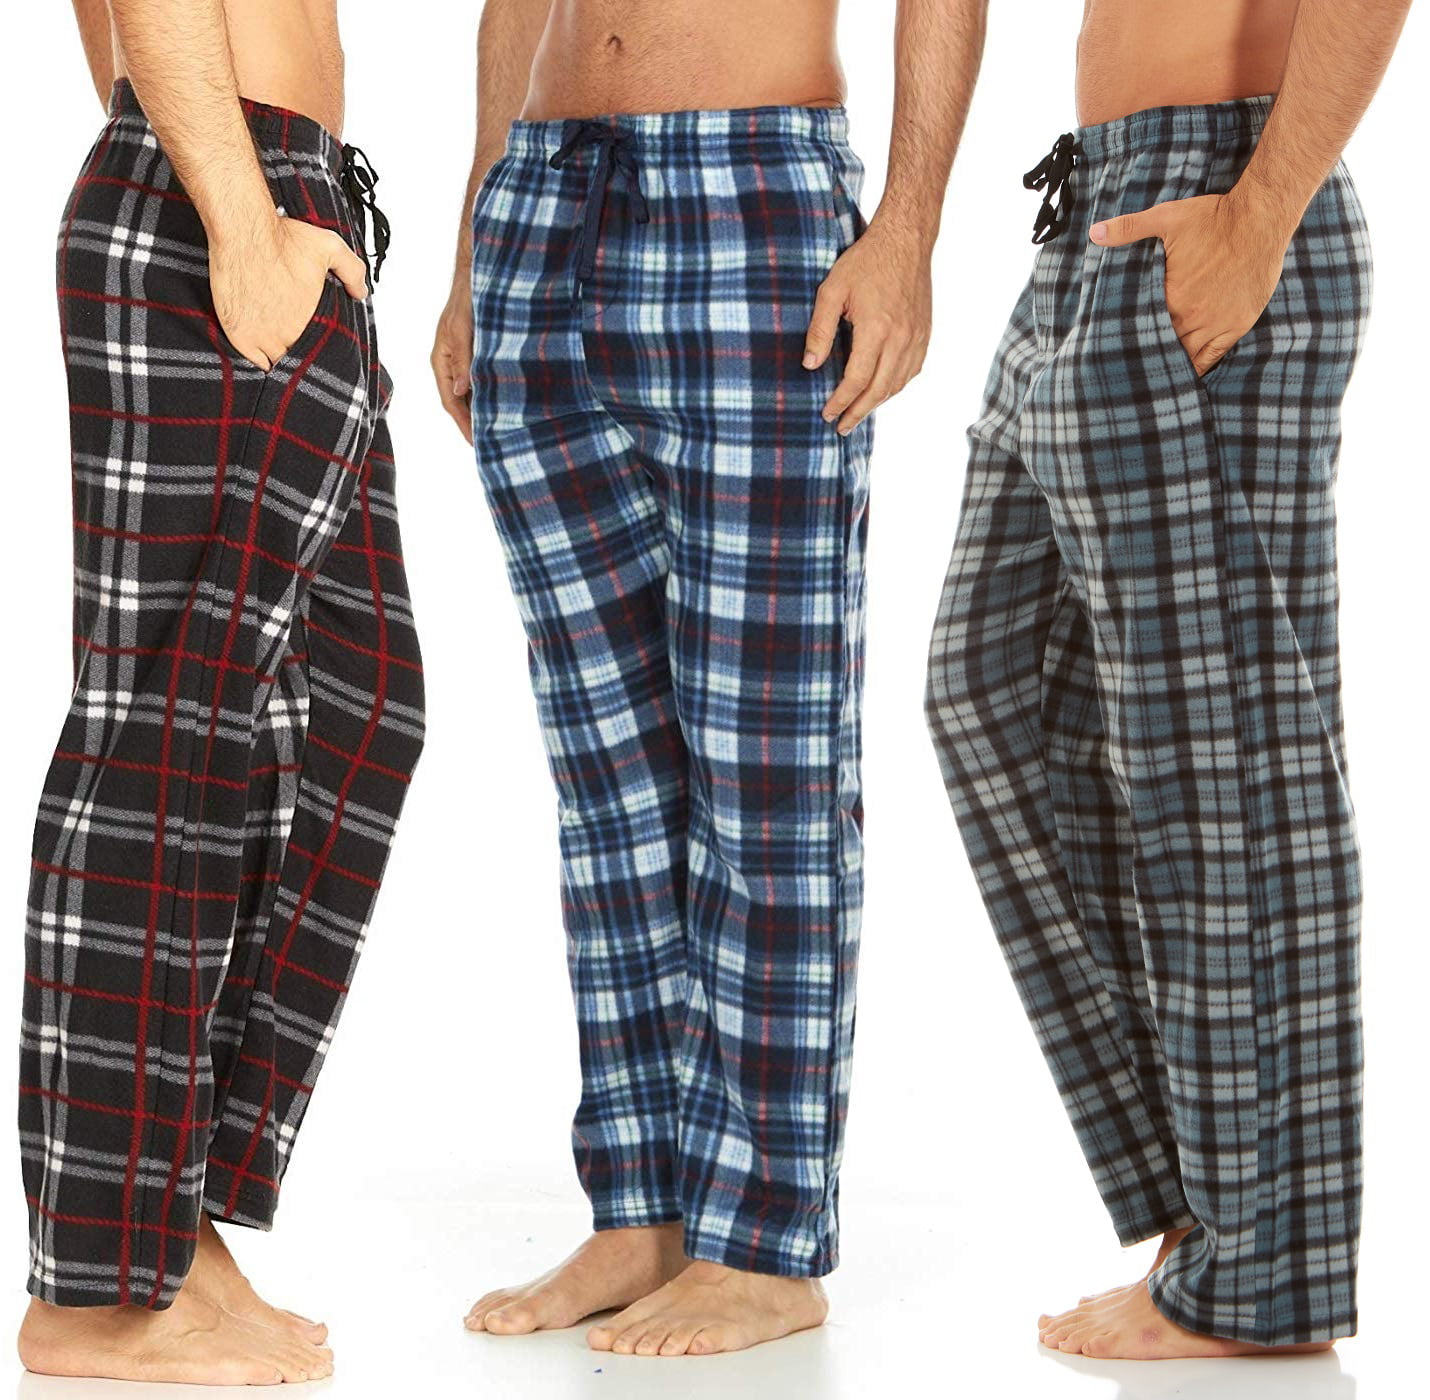 Pack of 3 DARESAY Men's Soft Jersey Knit Lounge Sleep Pants with Pockets